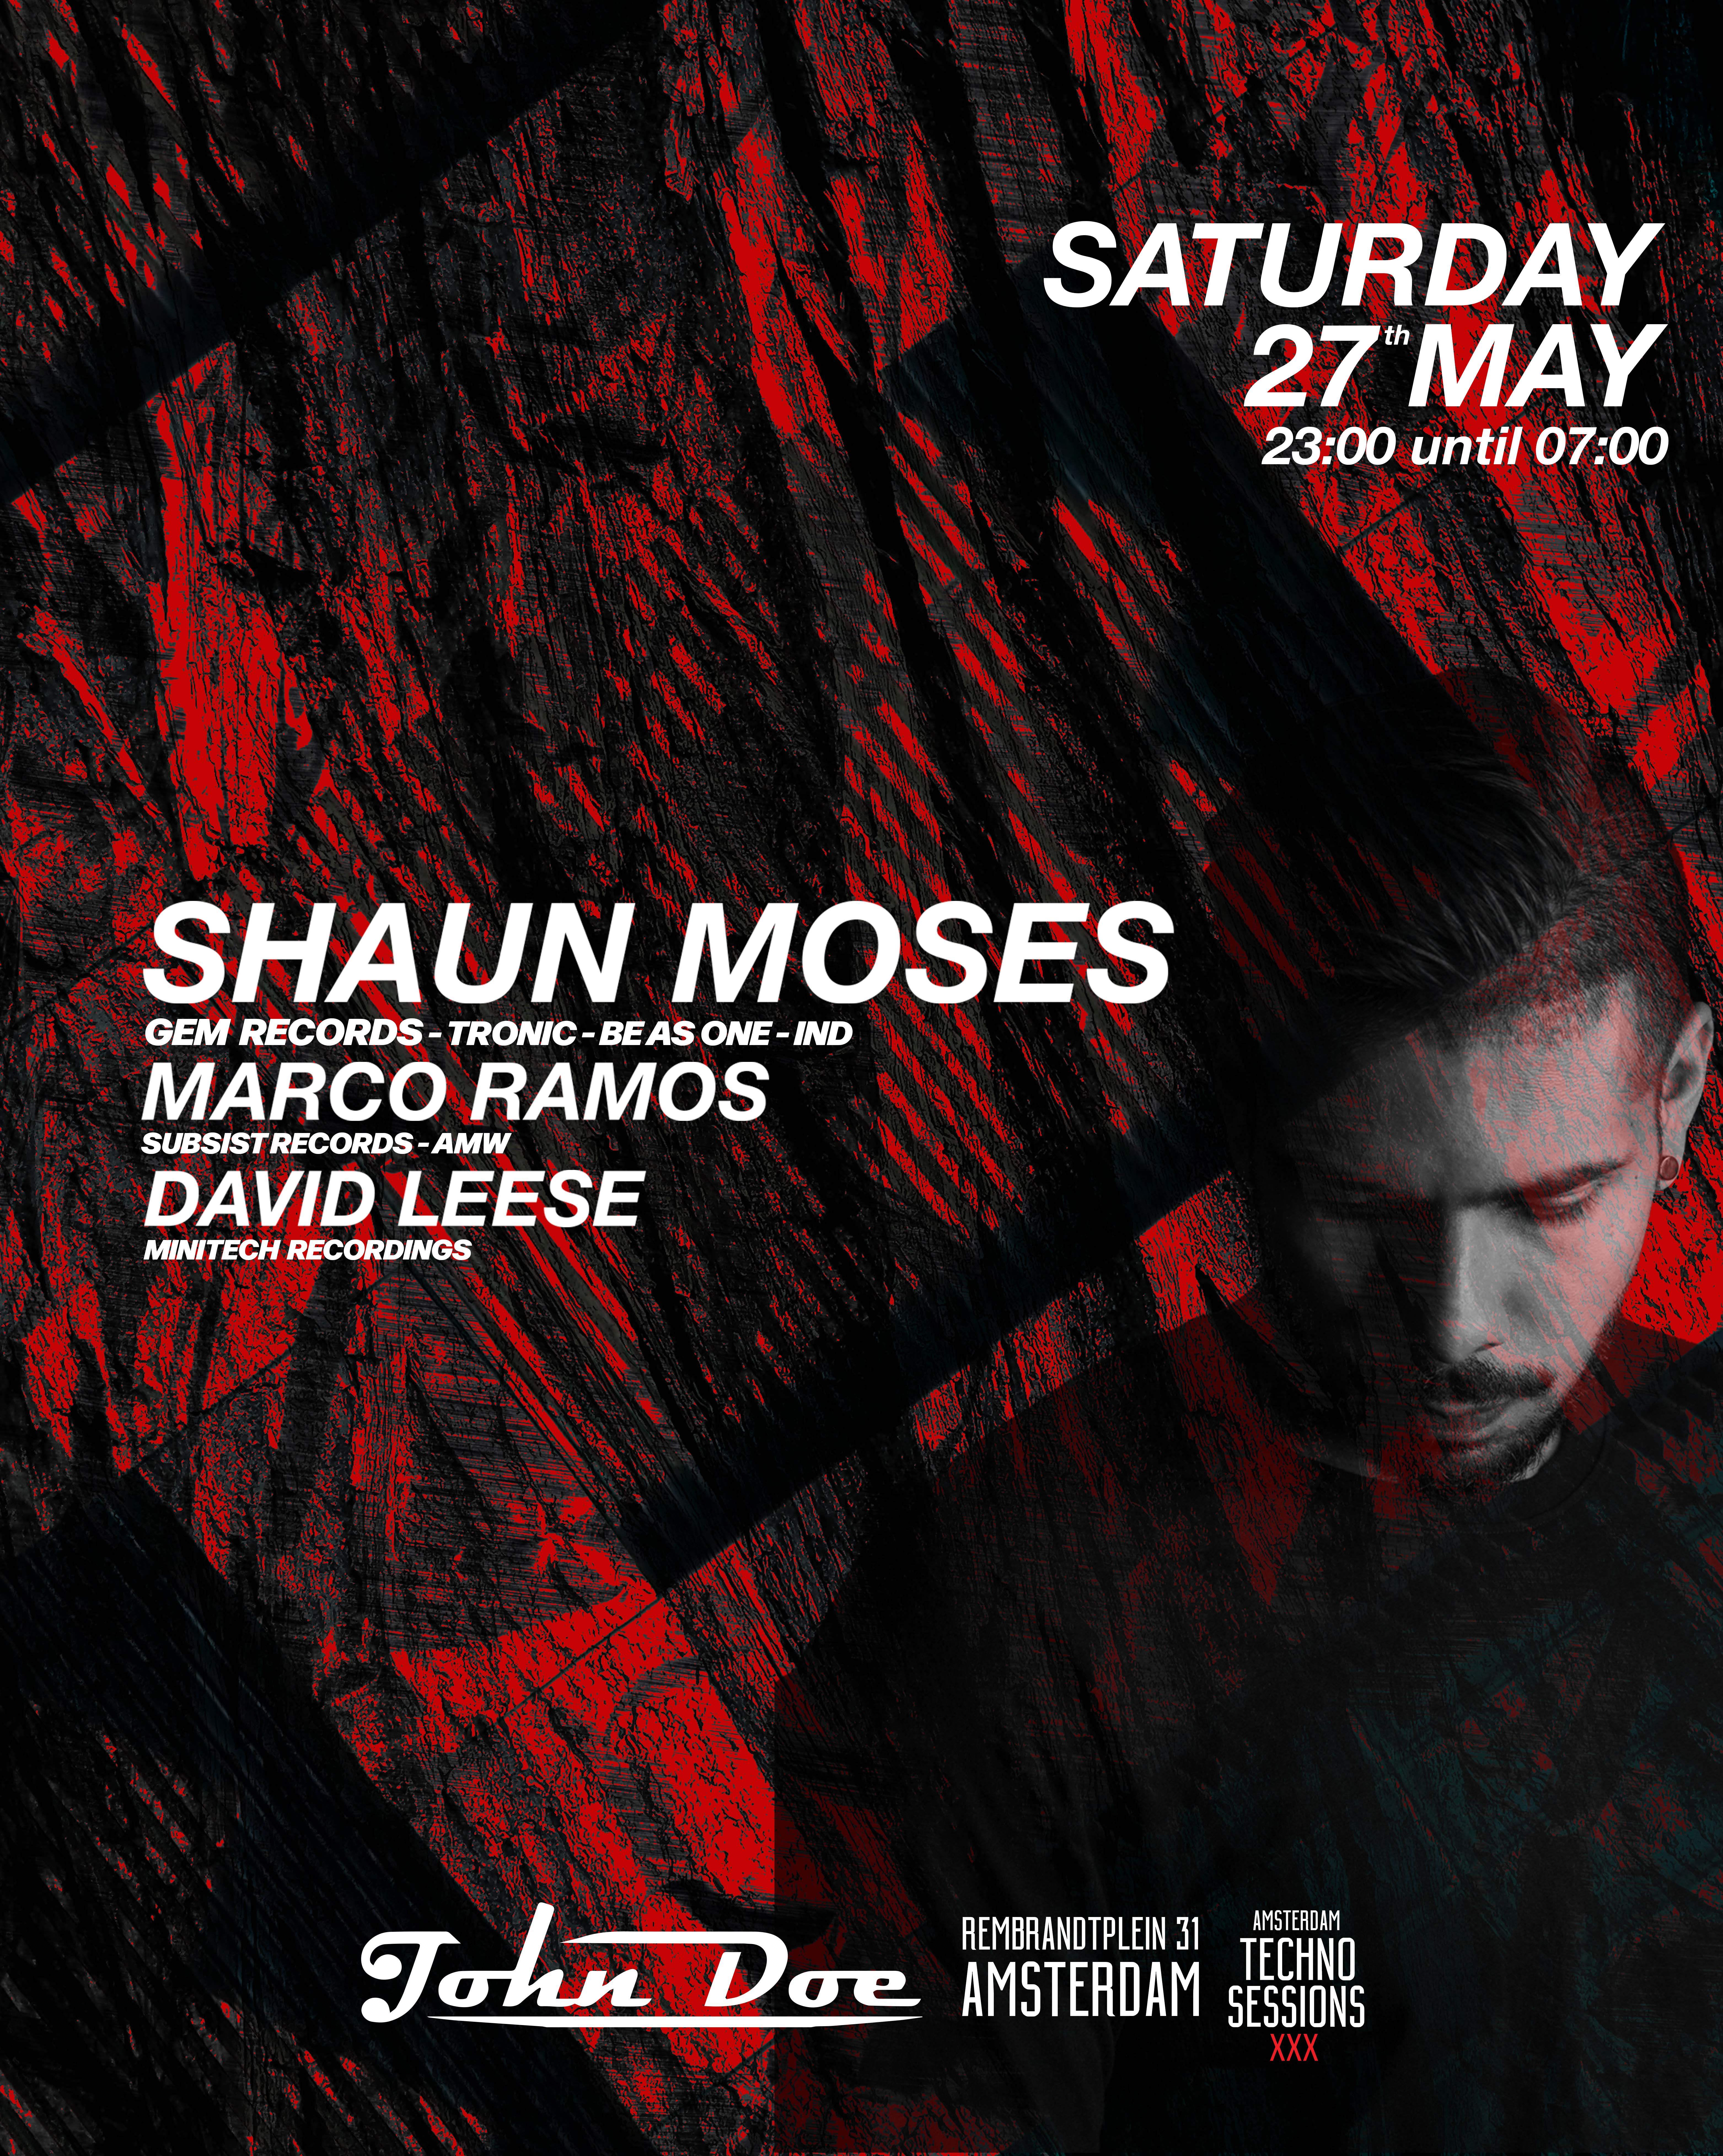 Amsterdam Techno Sessions with Shaun Moses (Gem Records, Tronic,Be As One) IND - フライヤー表